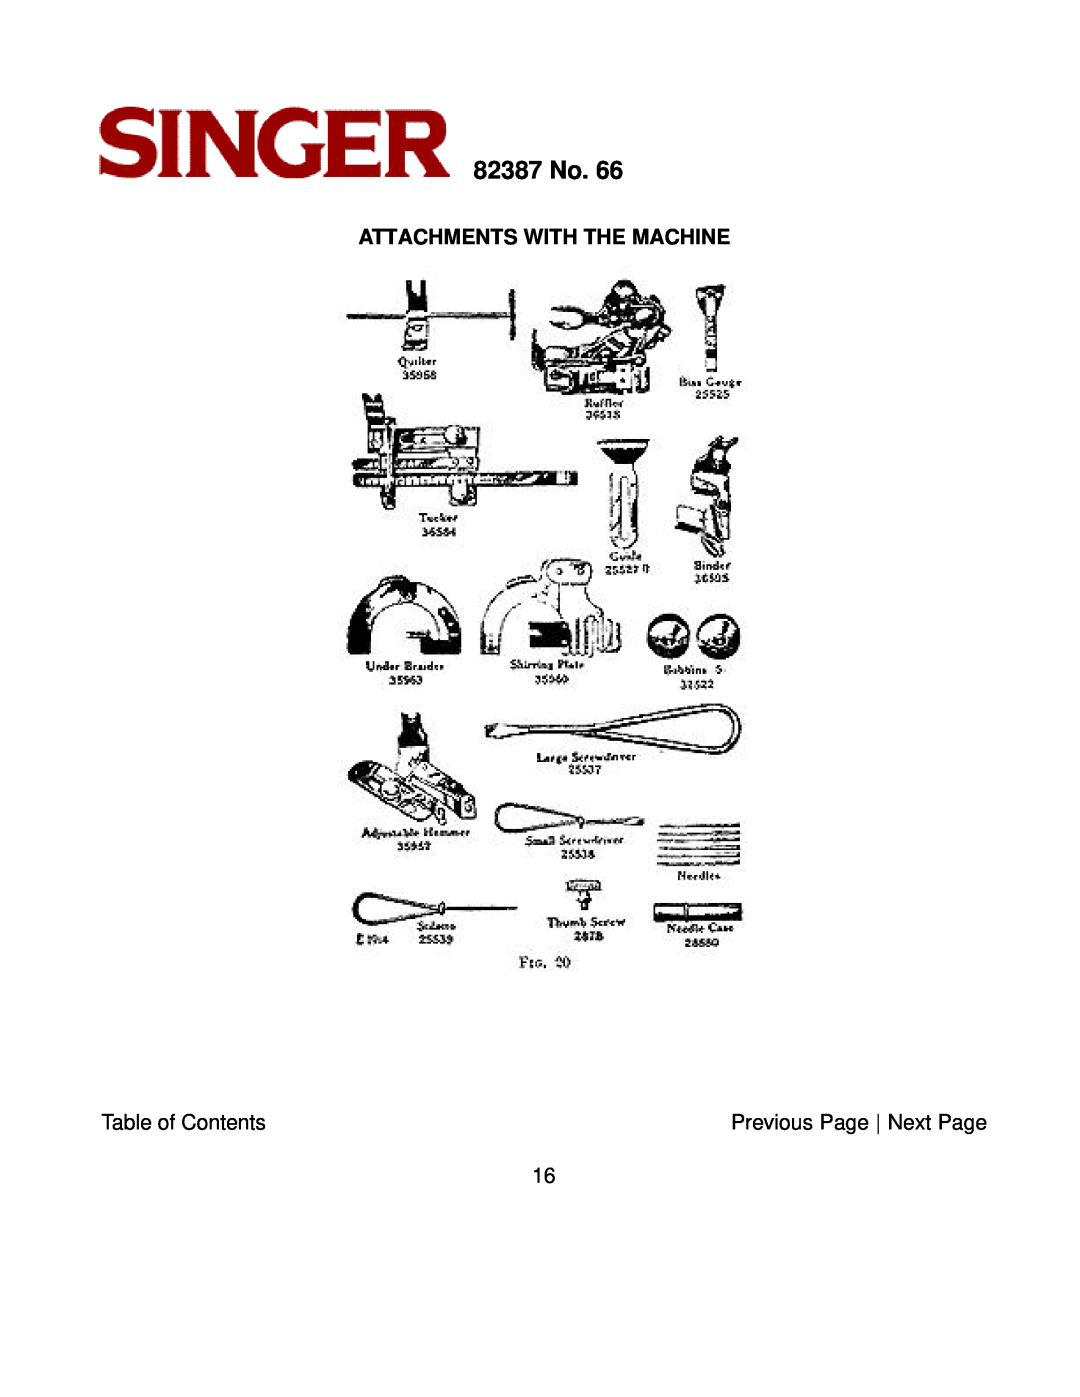 Singer instruction manual Attachments With The Machine, 82387 No 